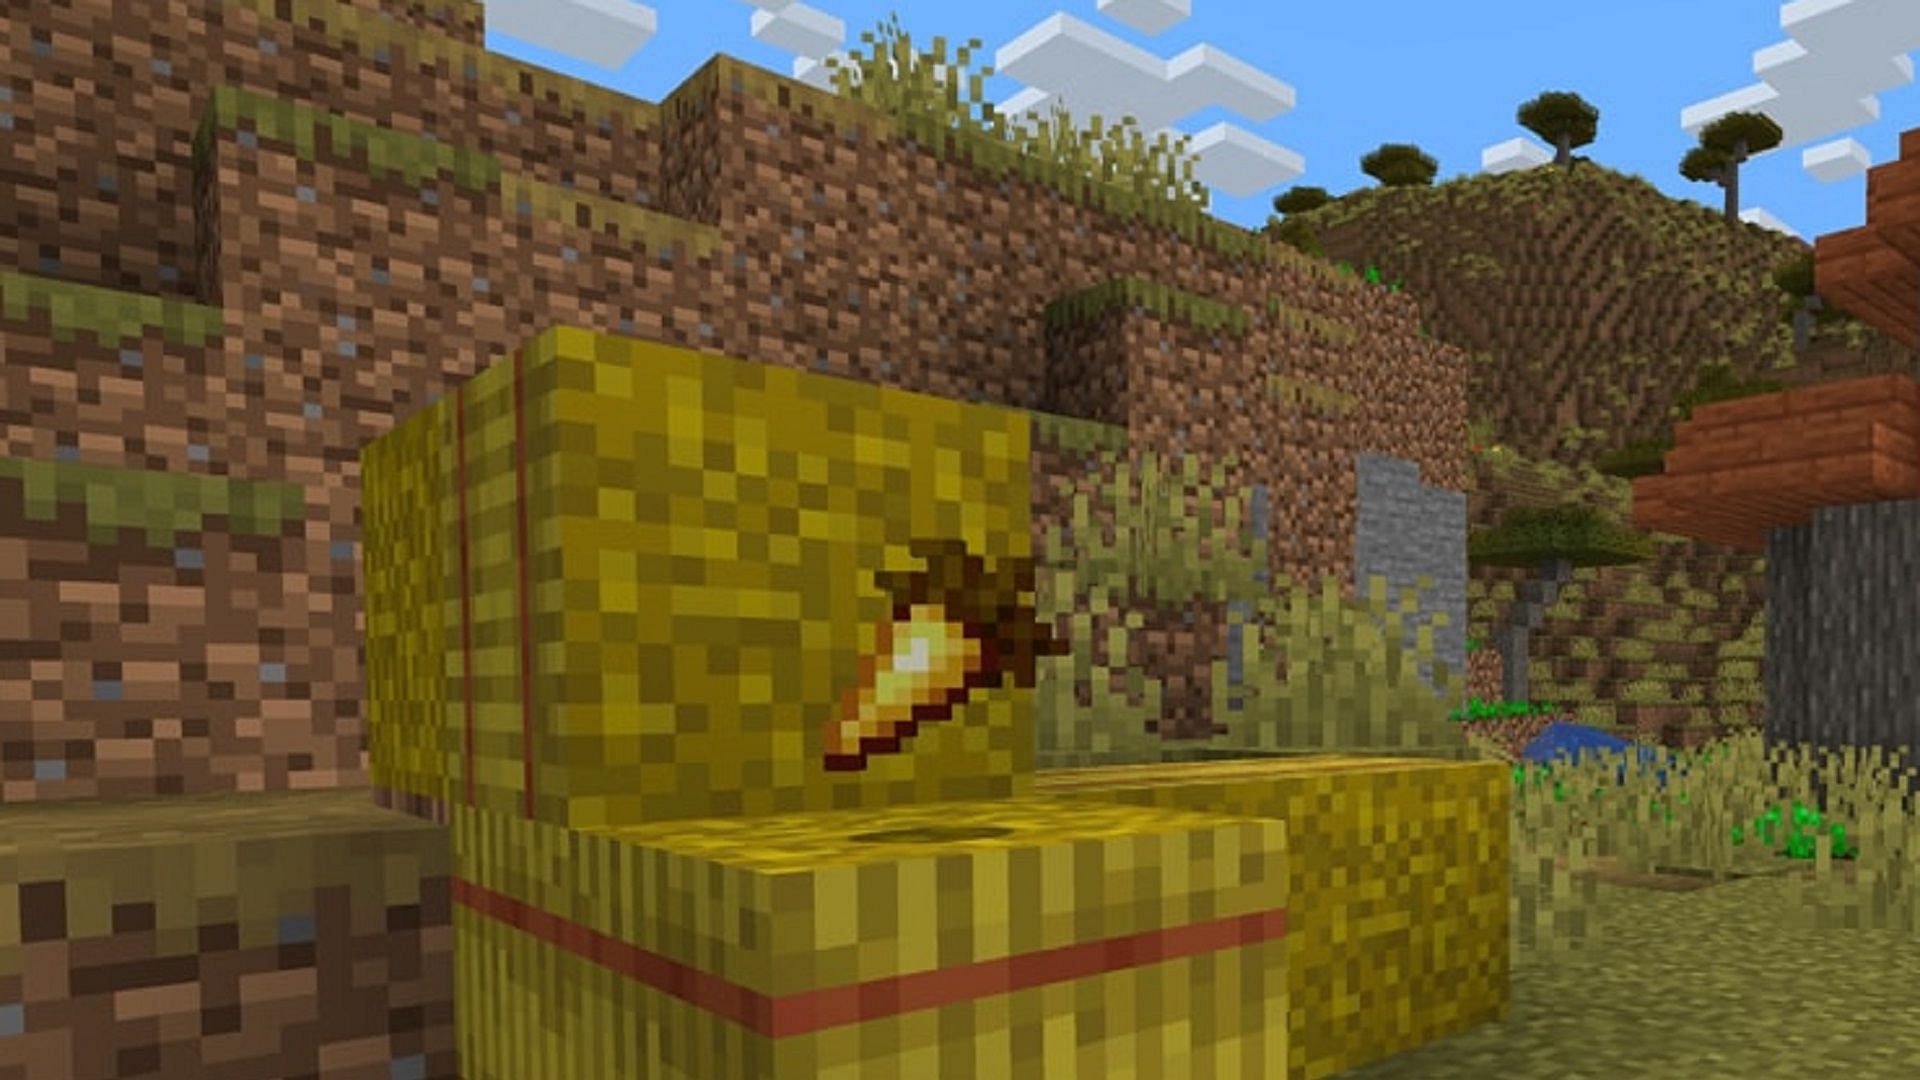 A golden carrot rests on a hay bale in Minecraft (Image via Minecraft.net)